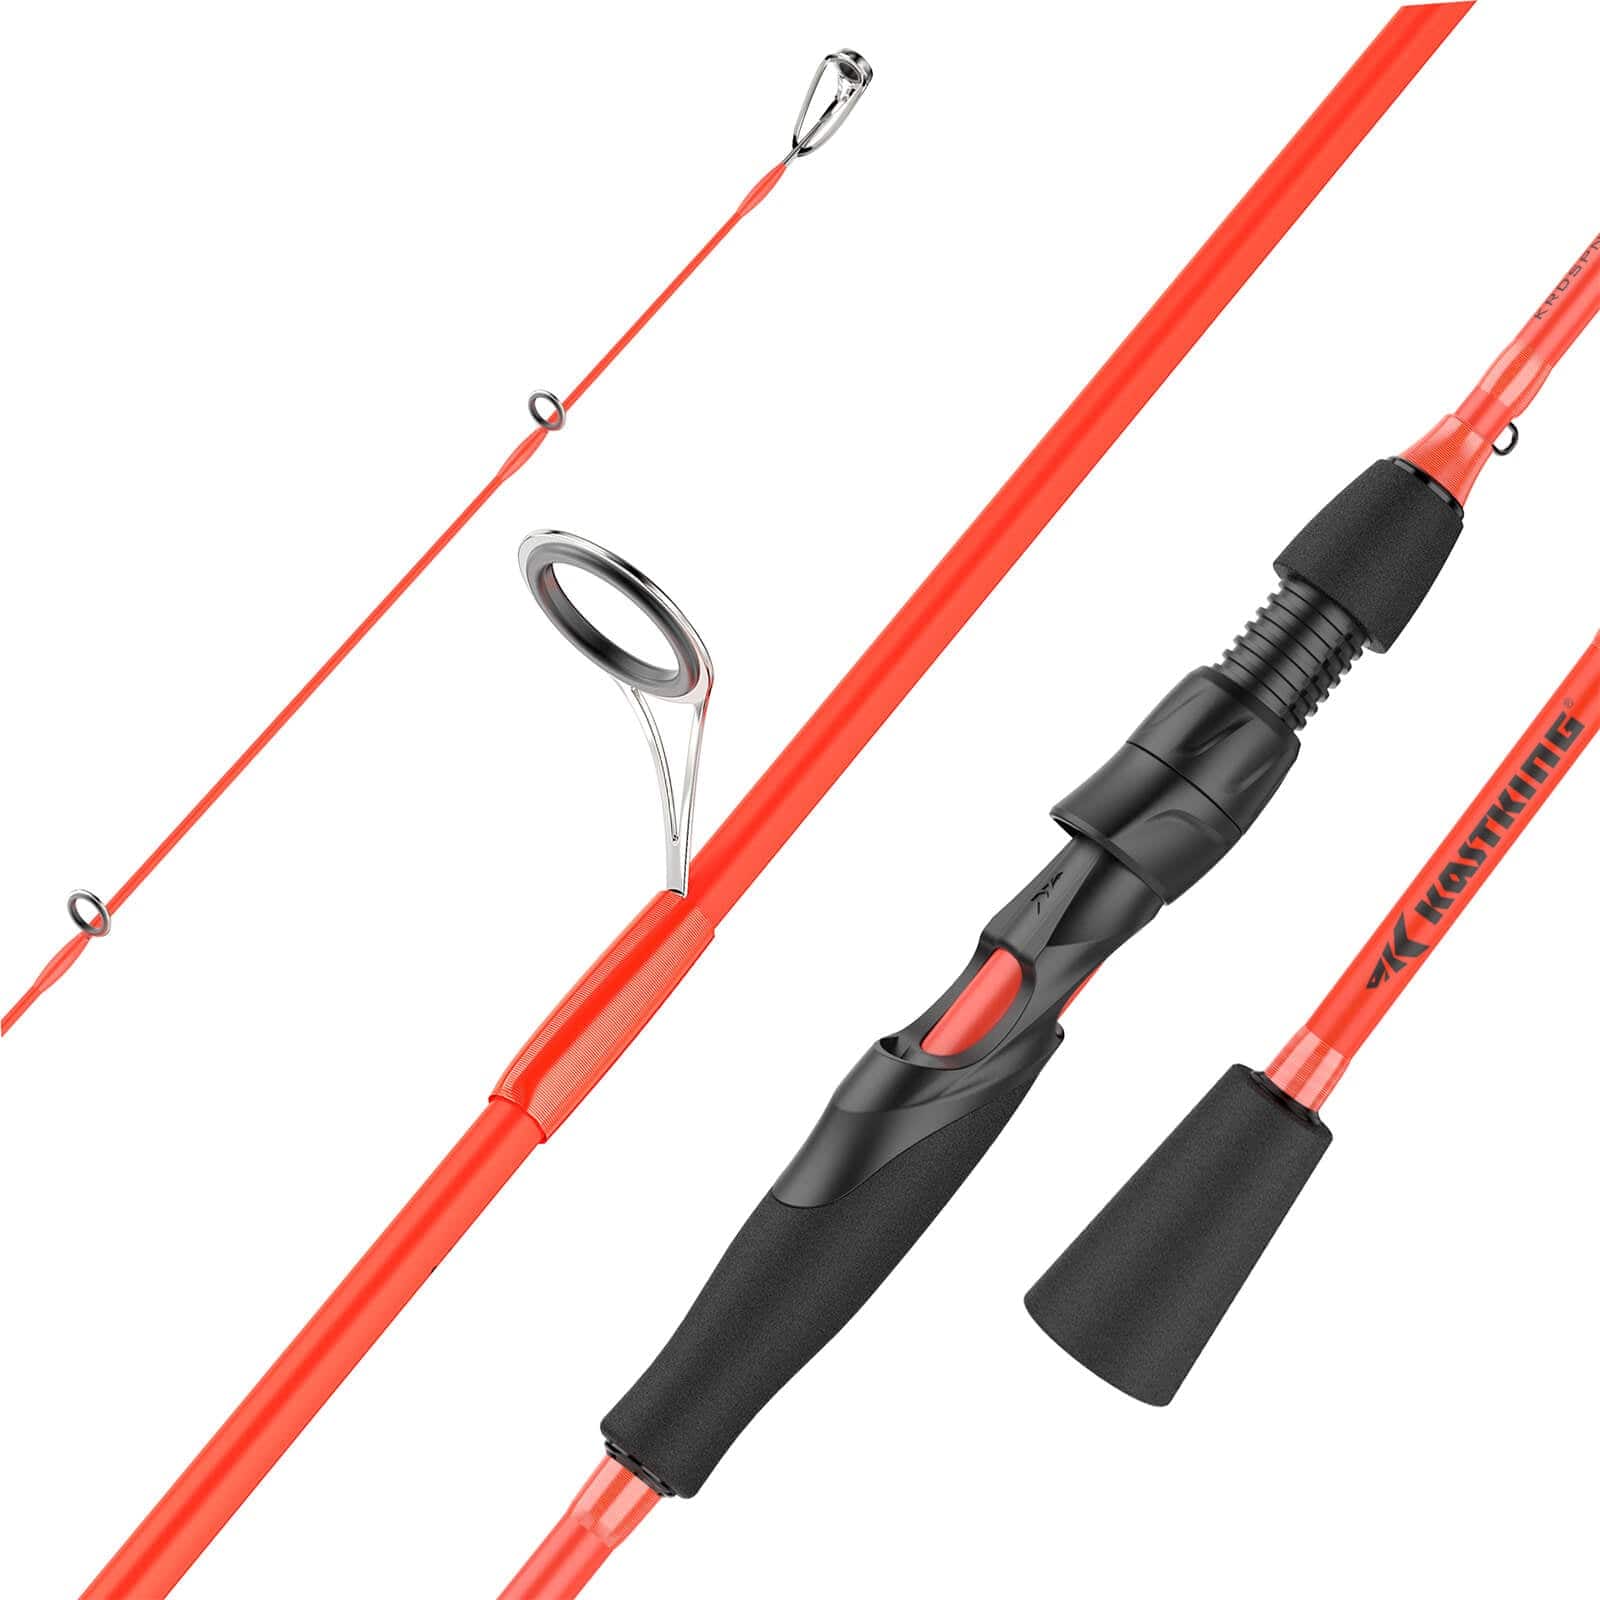 KastKing Royale Charge Spinning Rods